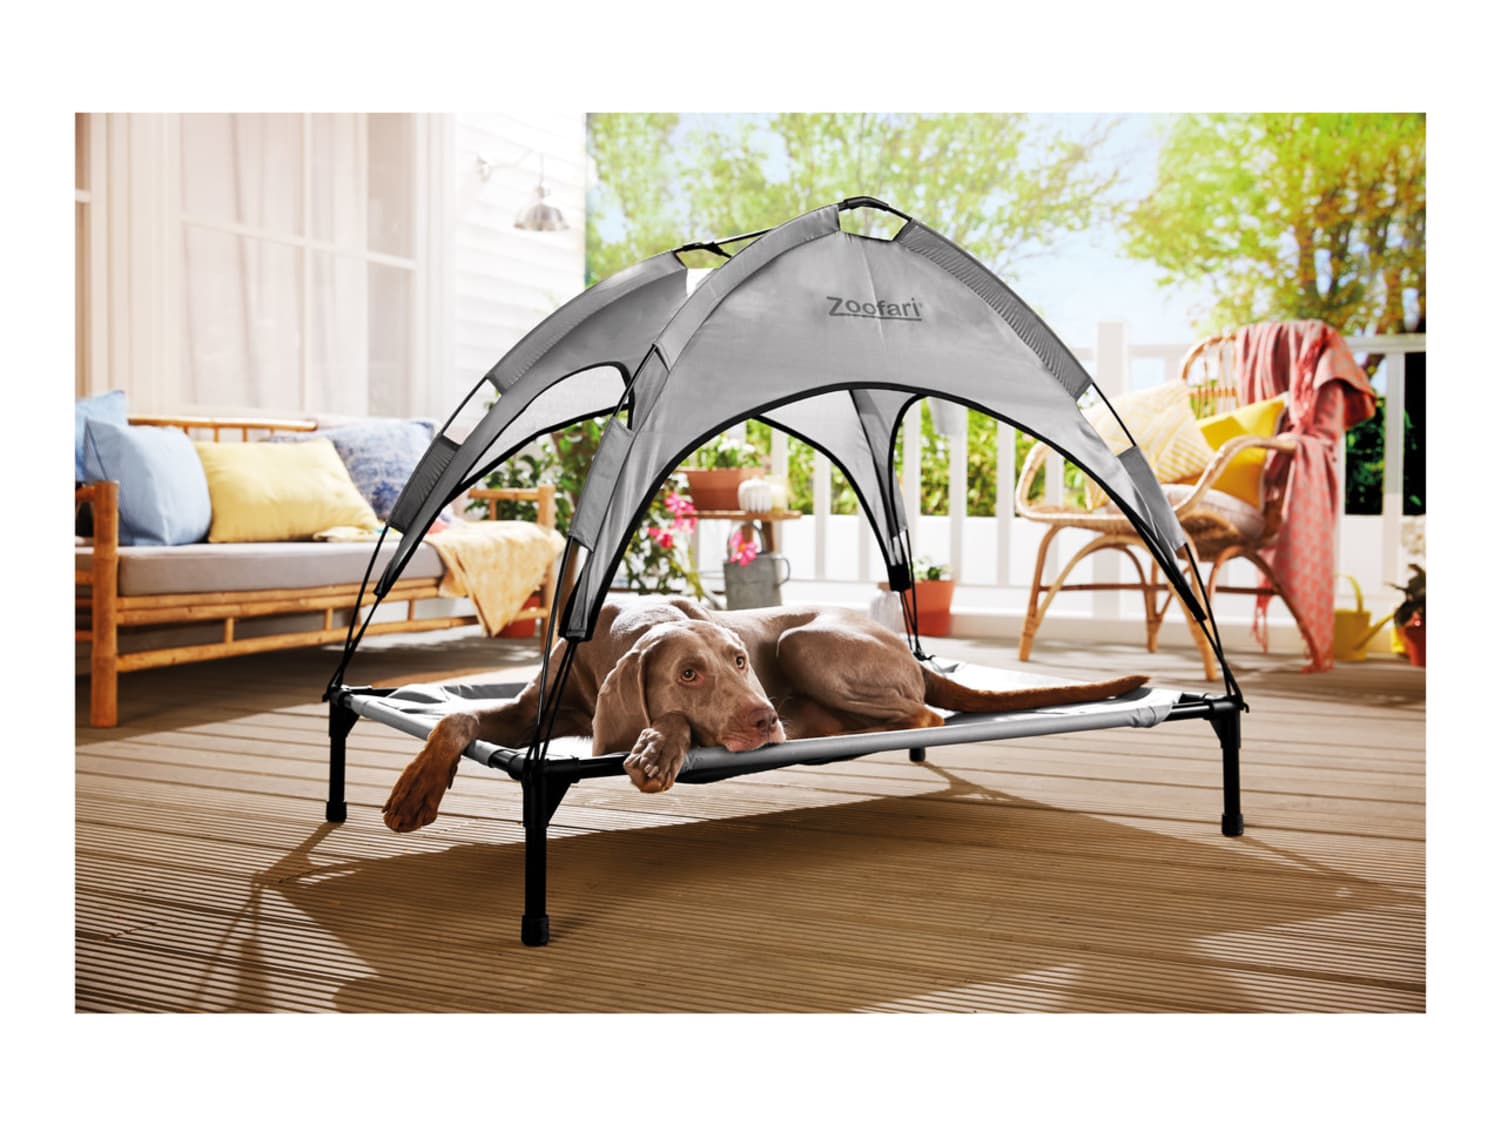 Lidl Selling a Dog Bed with a Sun Shade Apartment Therapy